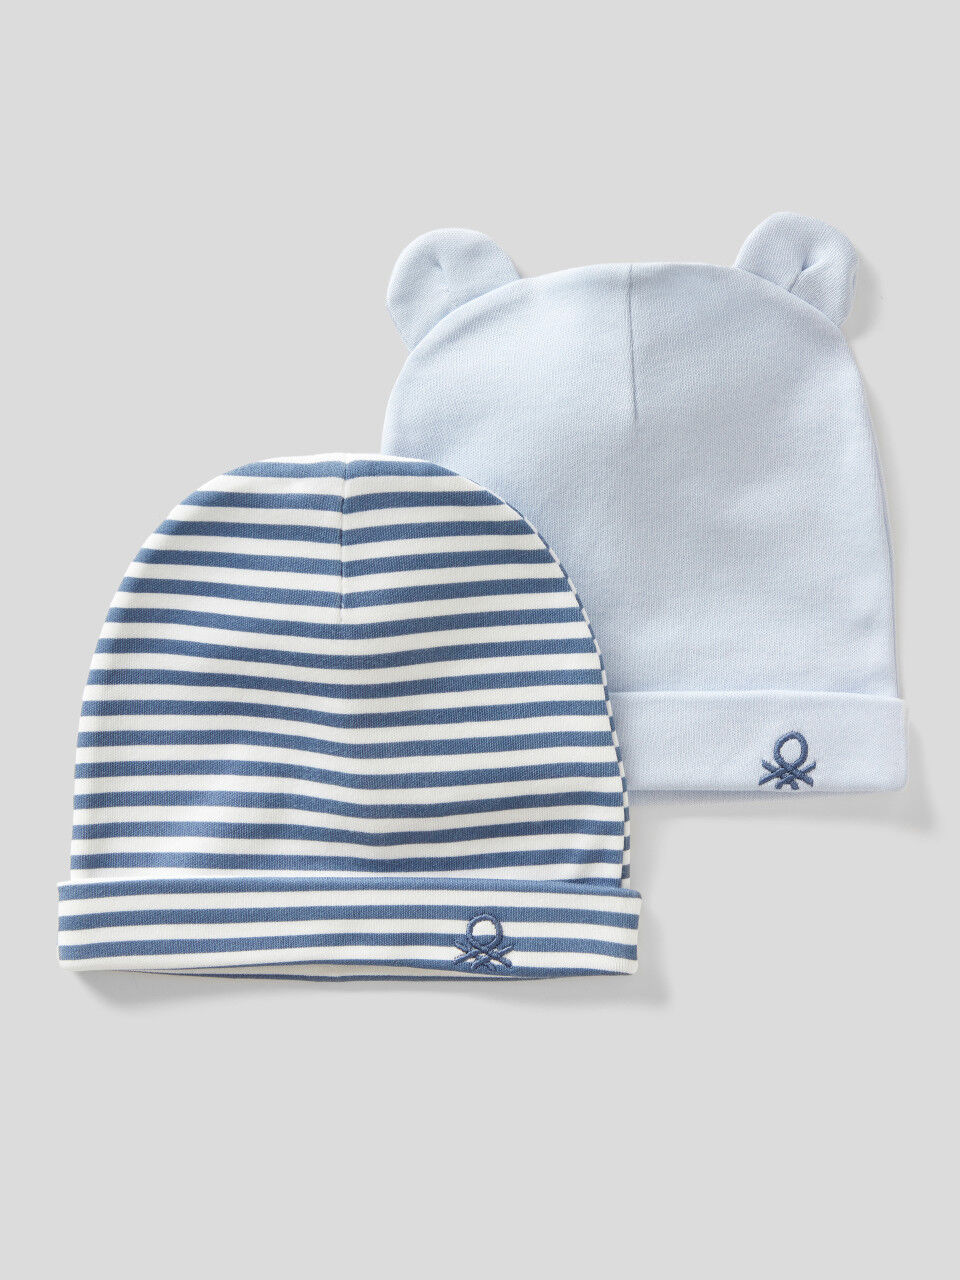 Two hats in 100% organic cotton